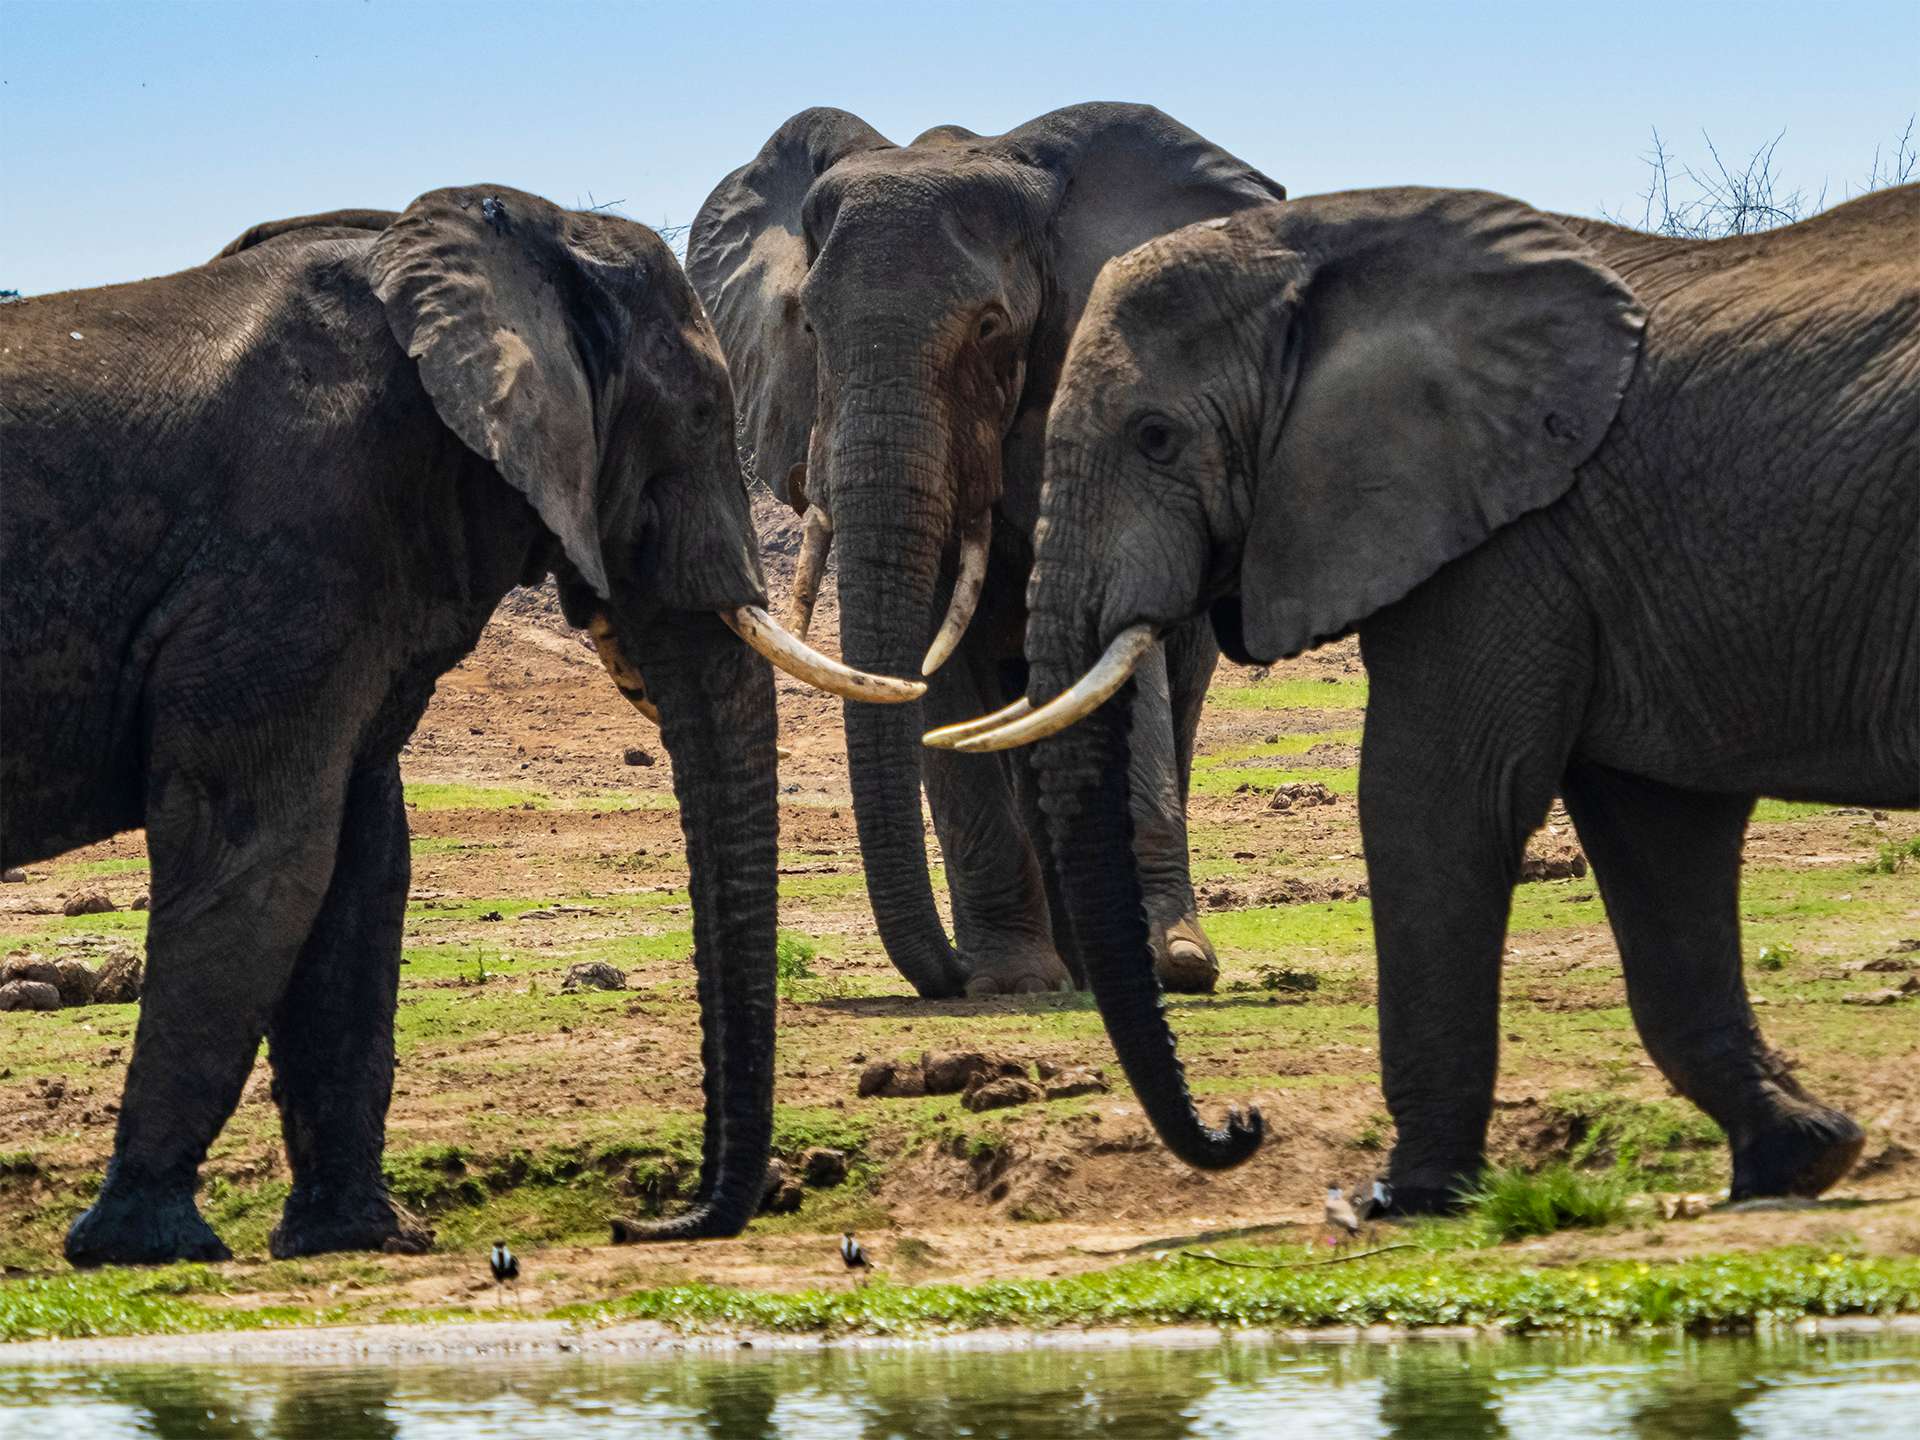 Three elephants with tusks facing each other